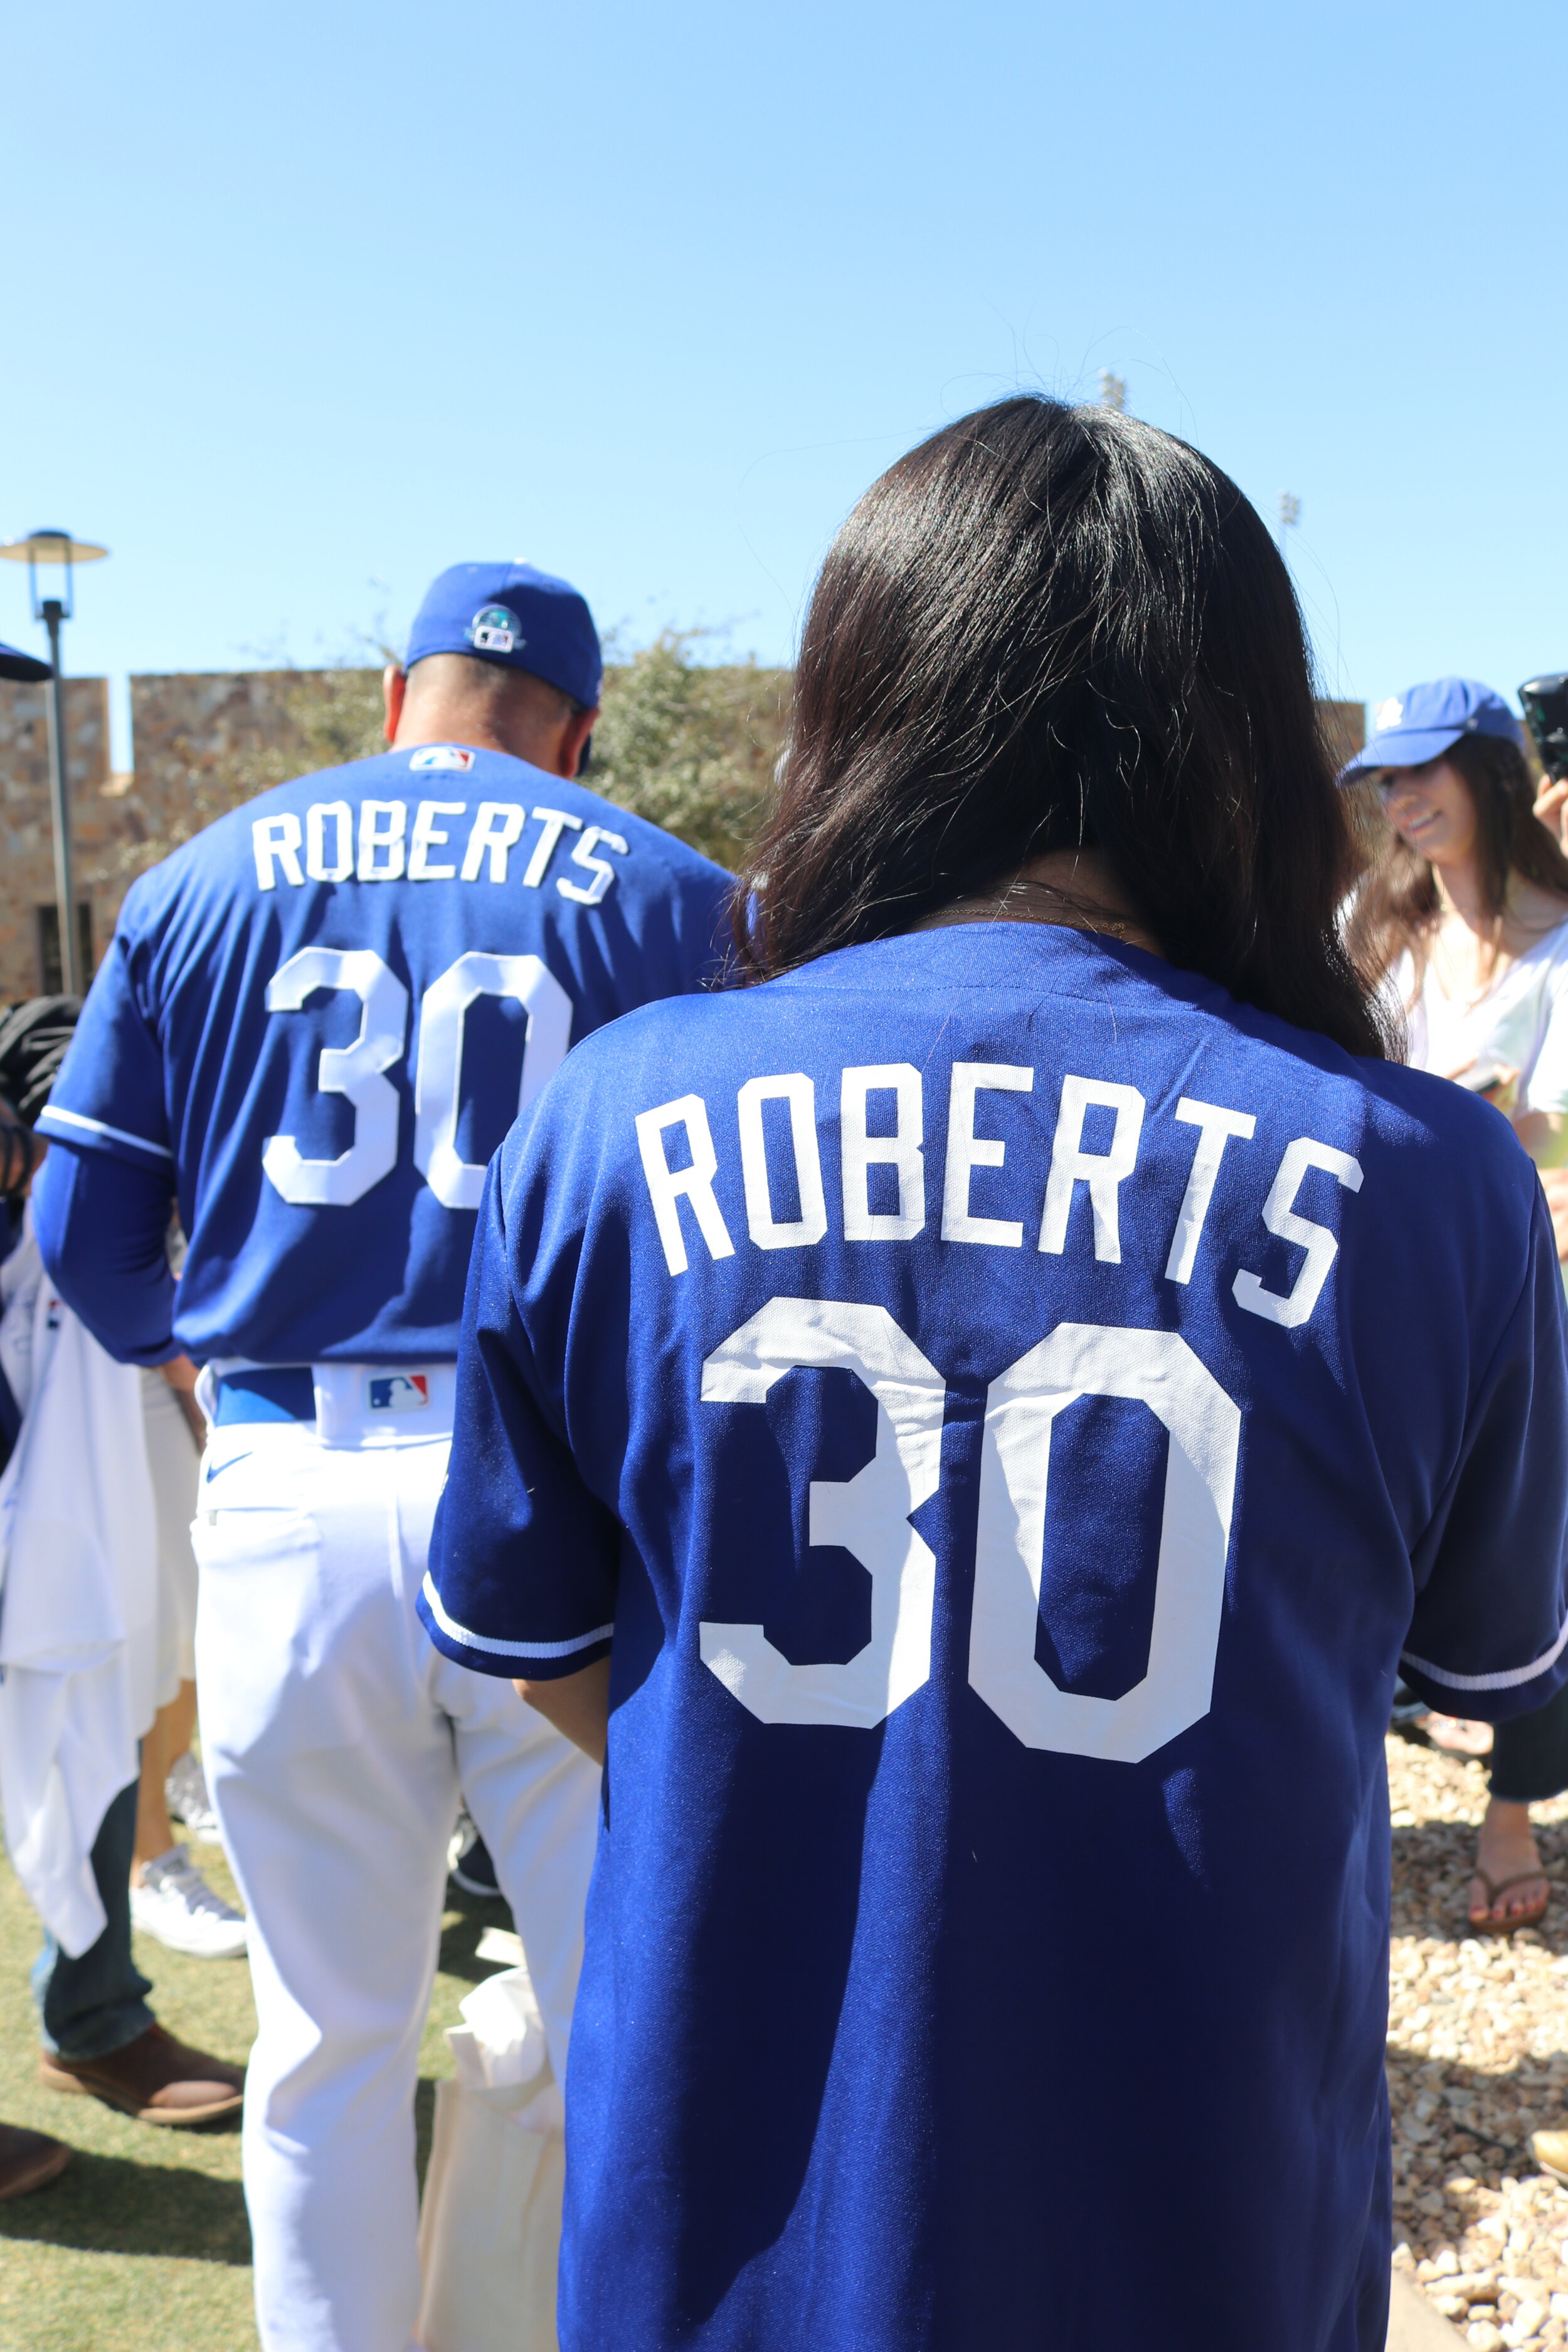 A fan wearing a Roberts Dodger jersey stands behind baseball player Roberts who is also wearing his uniform with his name on it. 